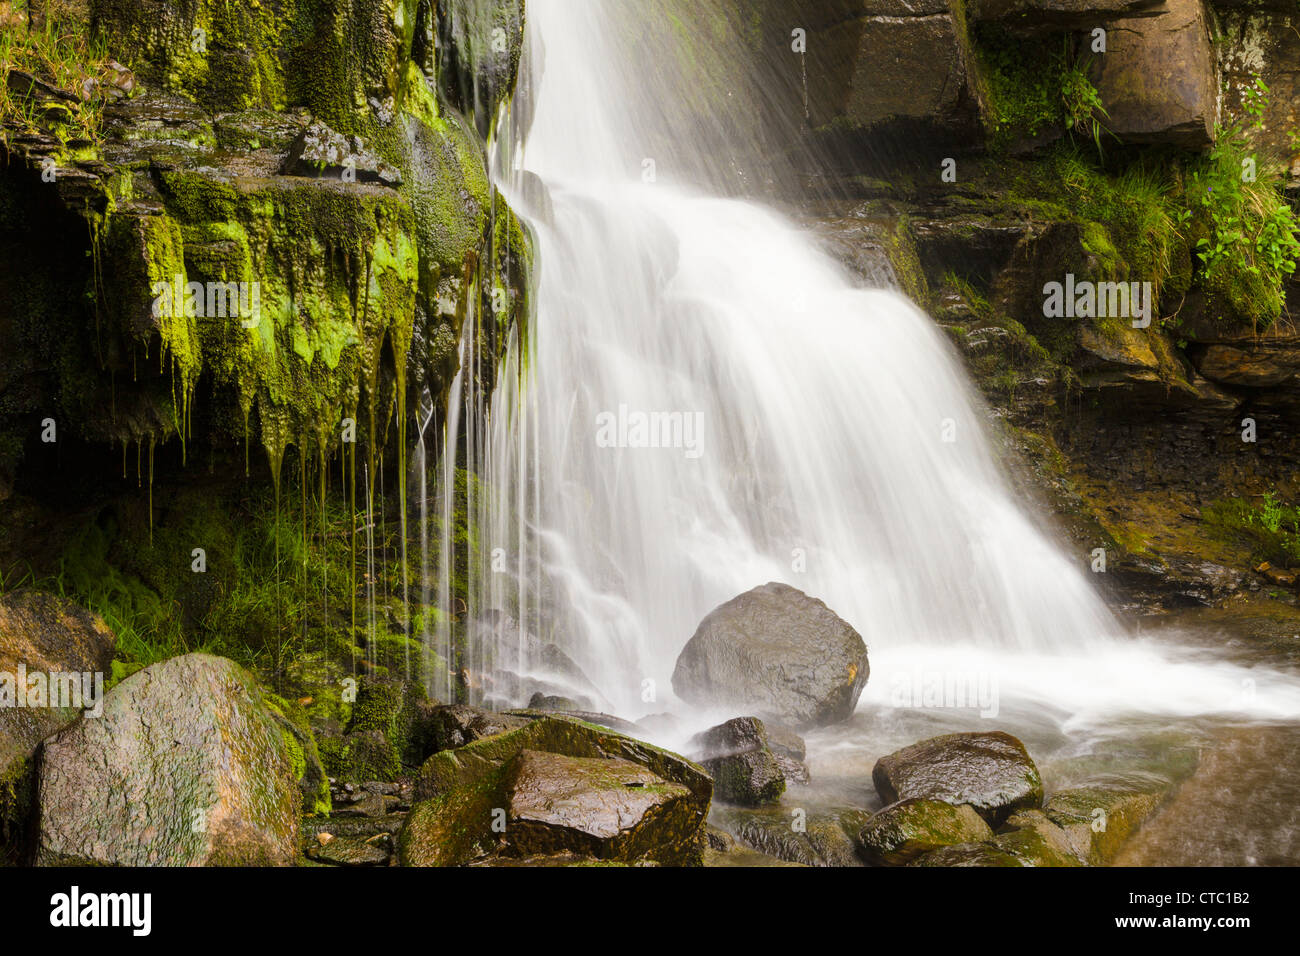 Waterfall, Swaledale, Yorkshire Dales, England Stock Photo